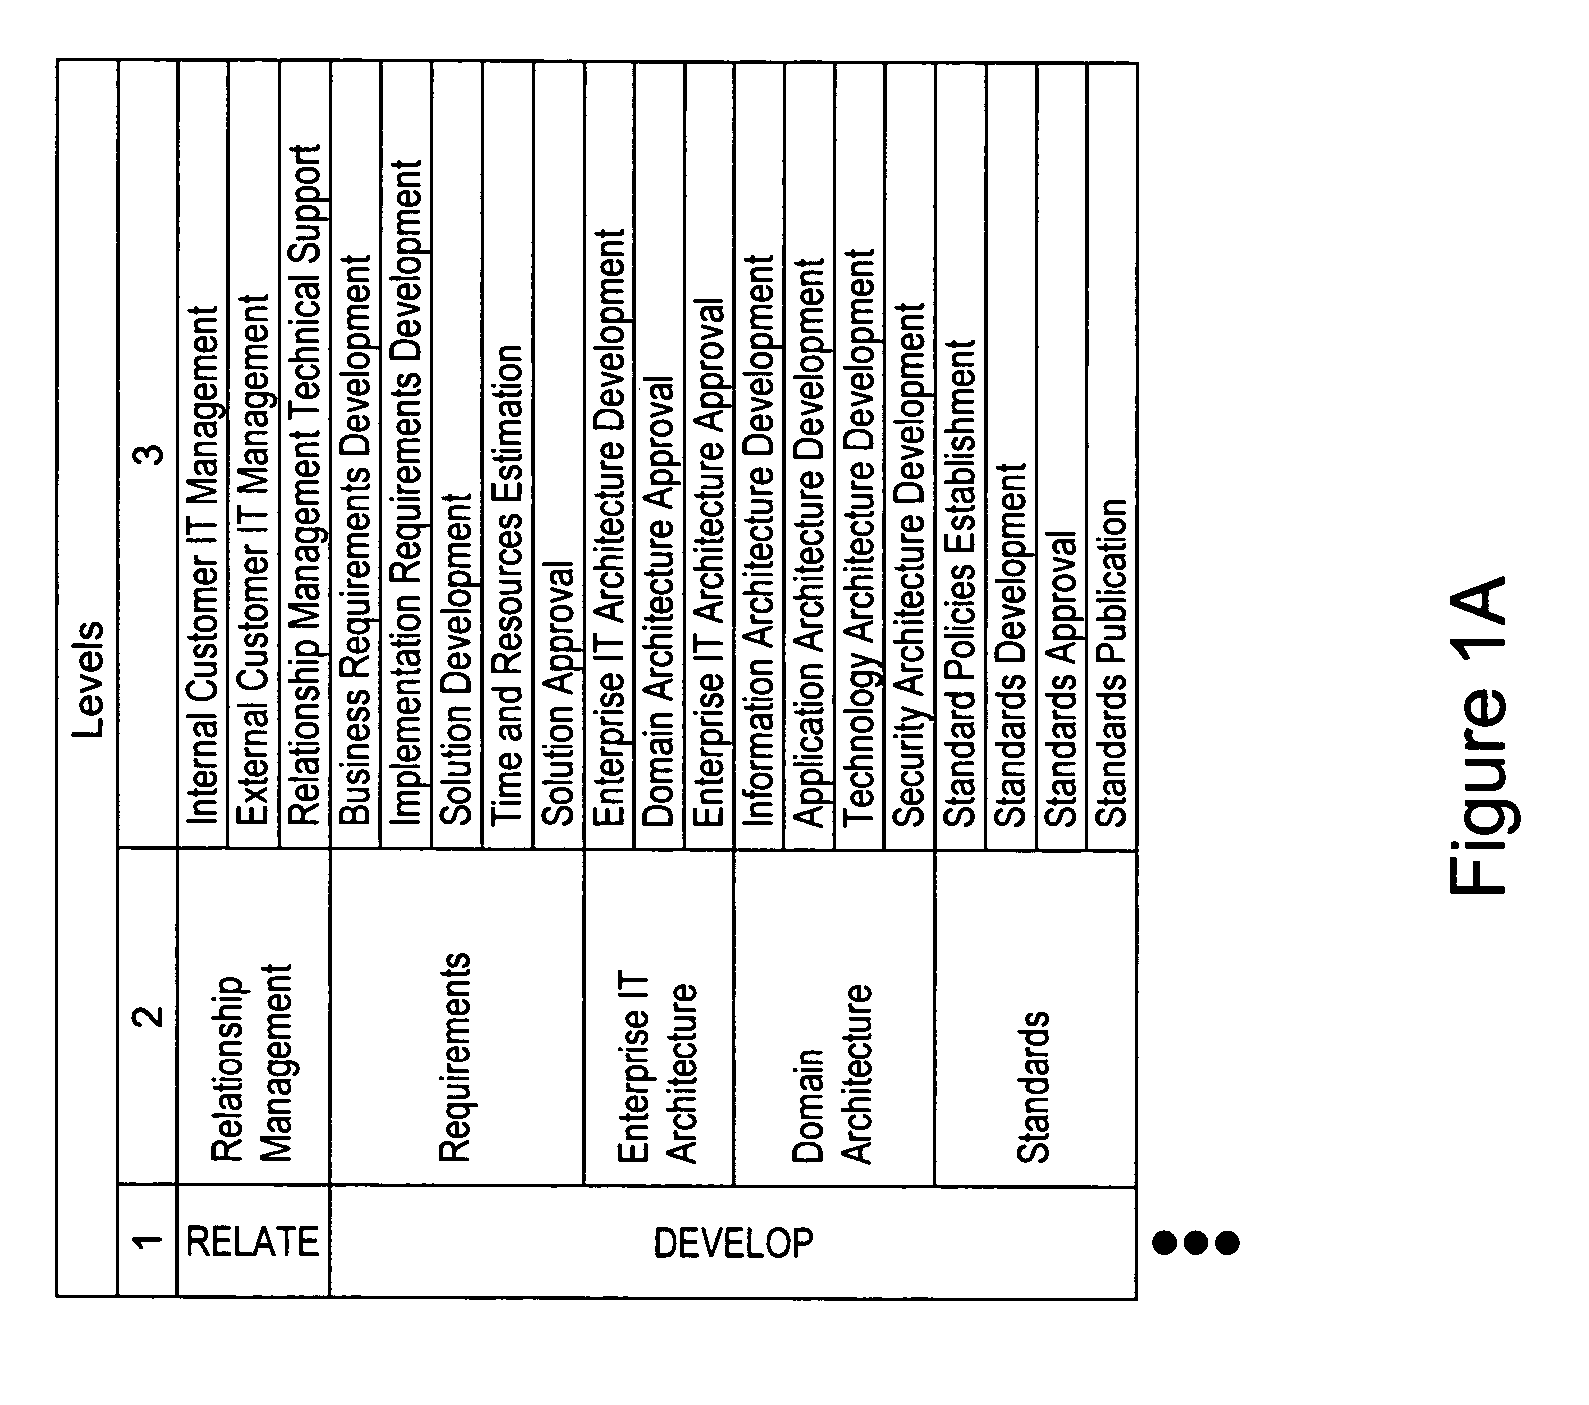 System and method for analyzing an operation of an organization